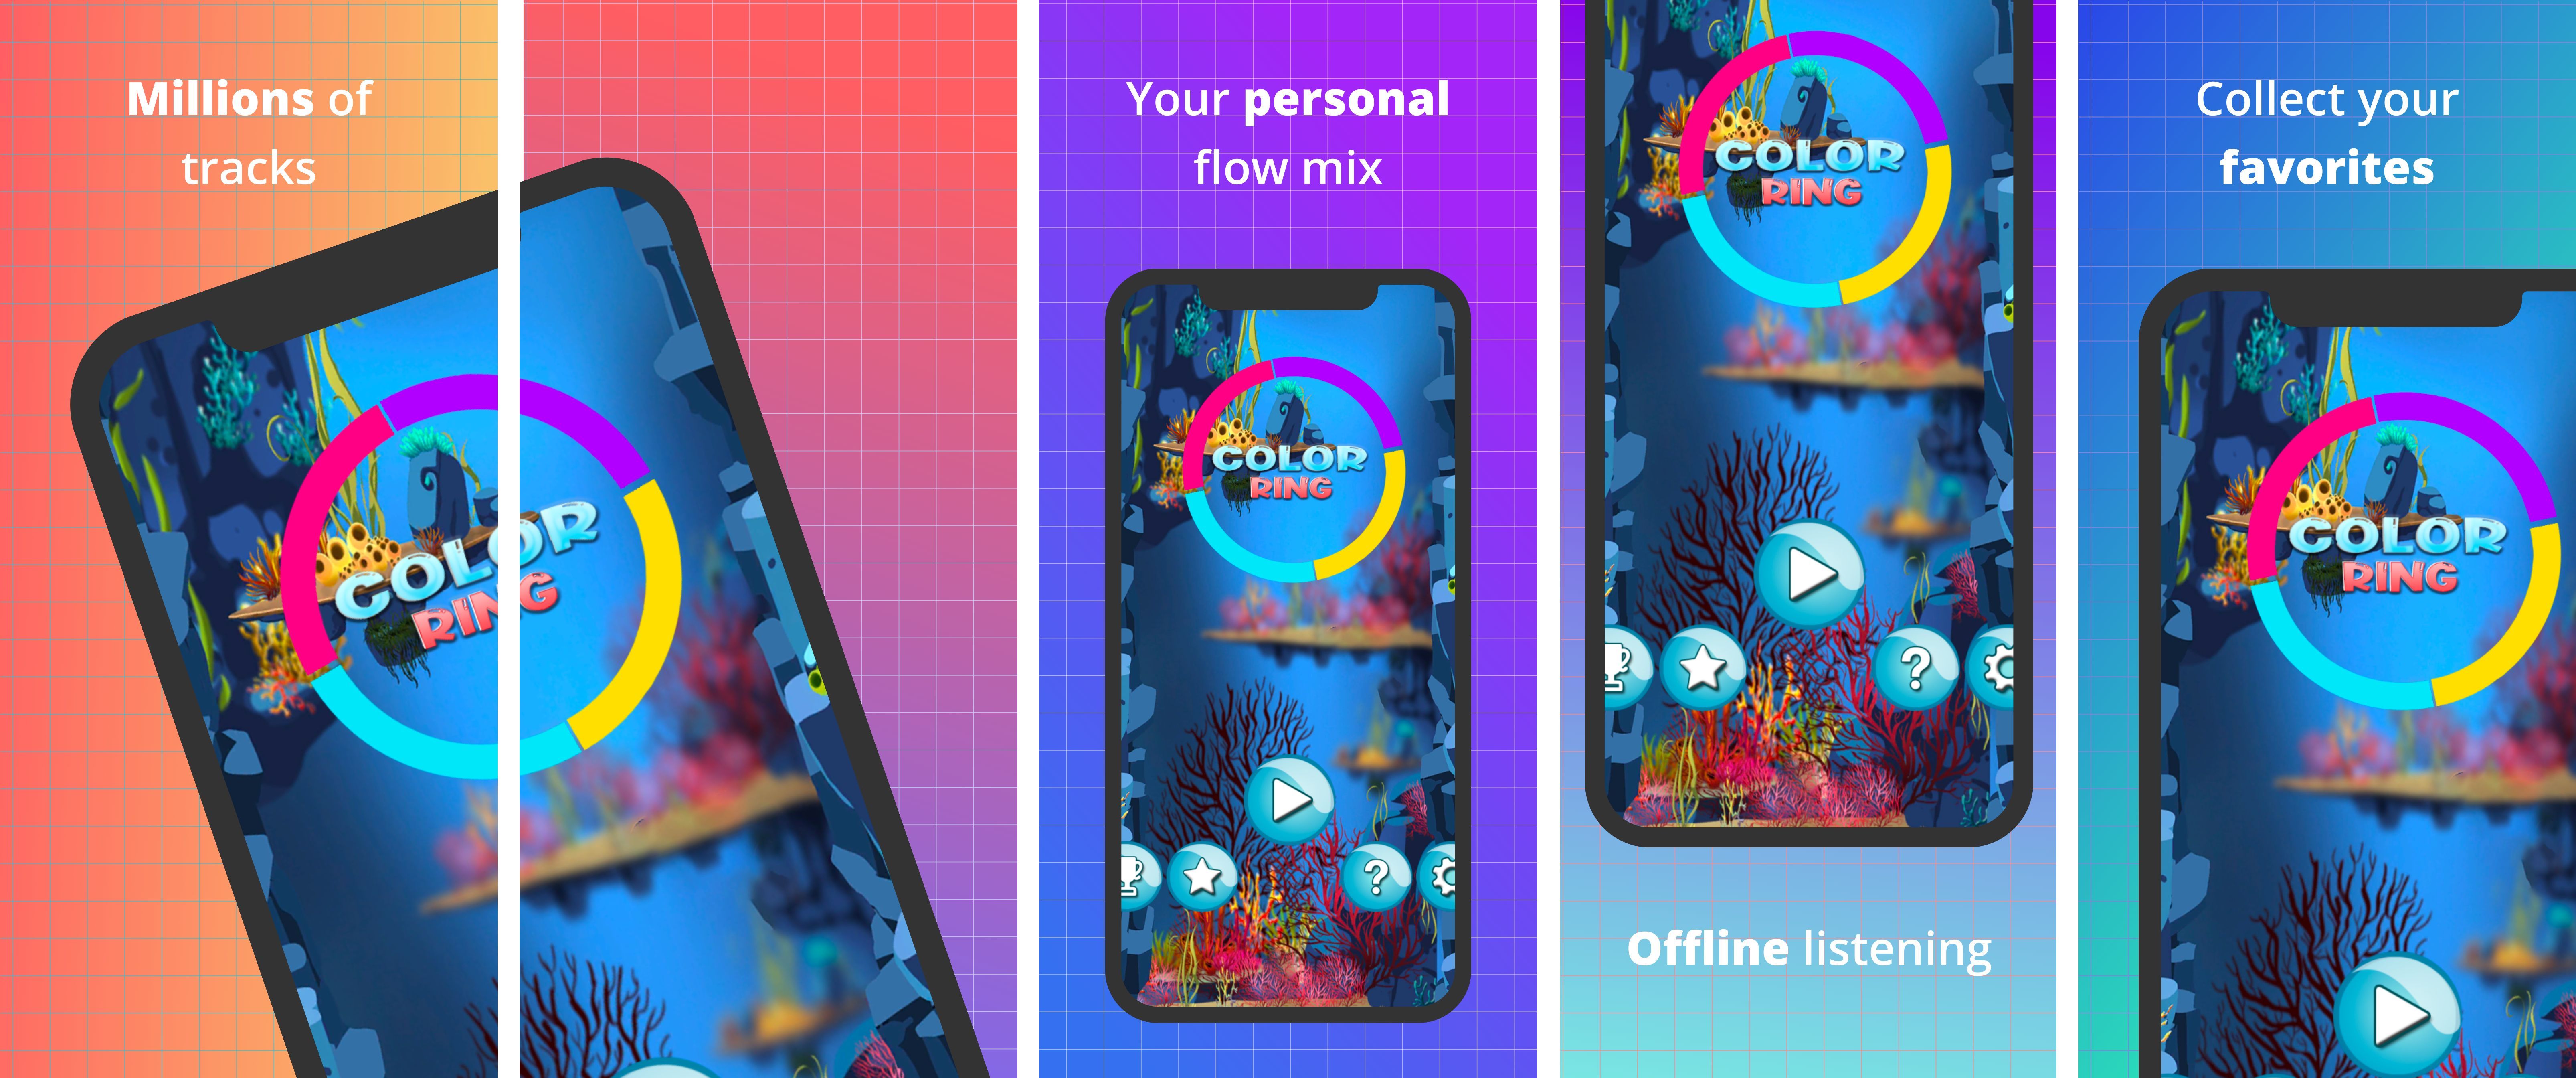 App Store Panorama Screenshot - iPhone XS Max 5 template. Quickly edit text, colors, images, and more for free.